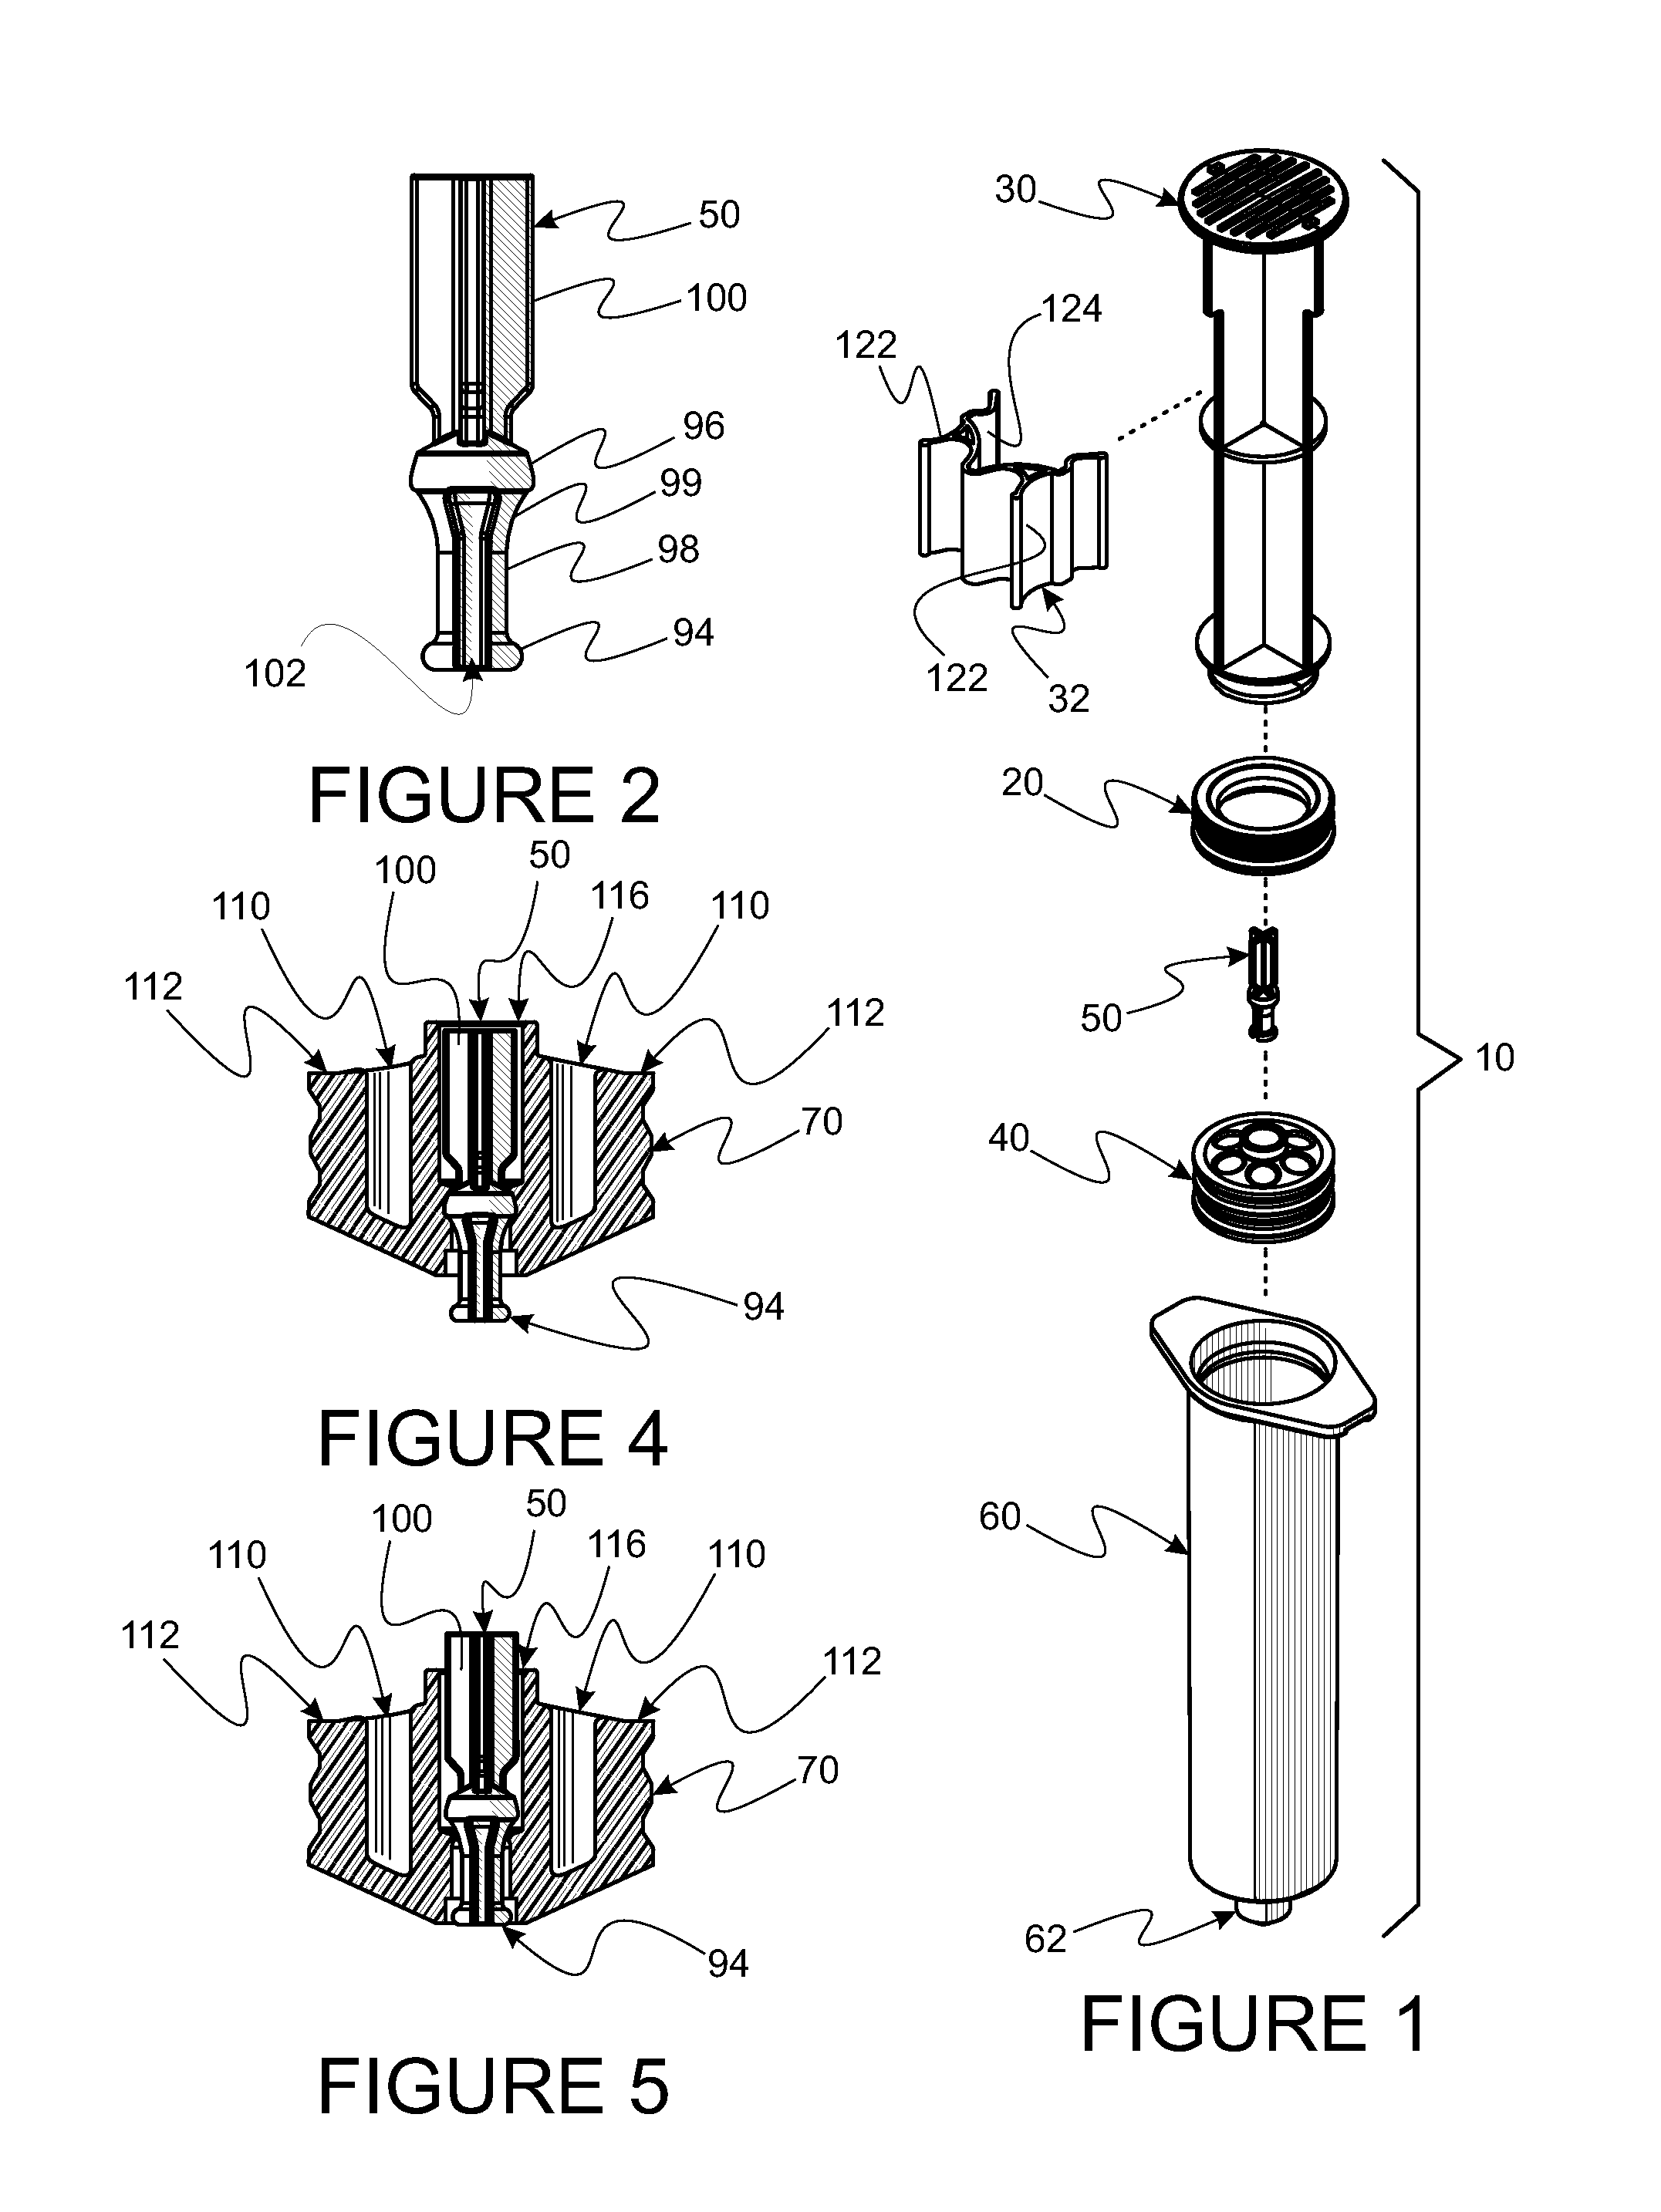 Dual-chamber syringe and associated connecting systems